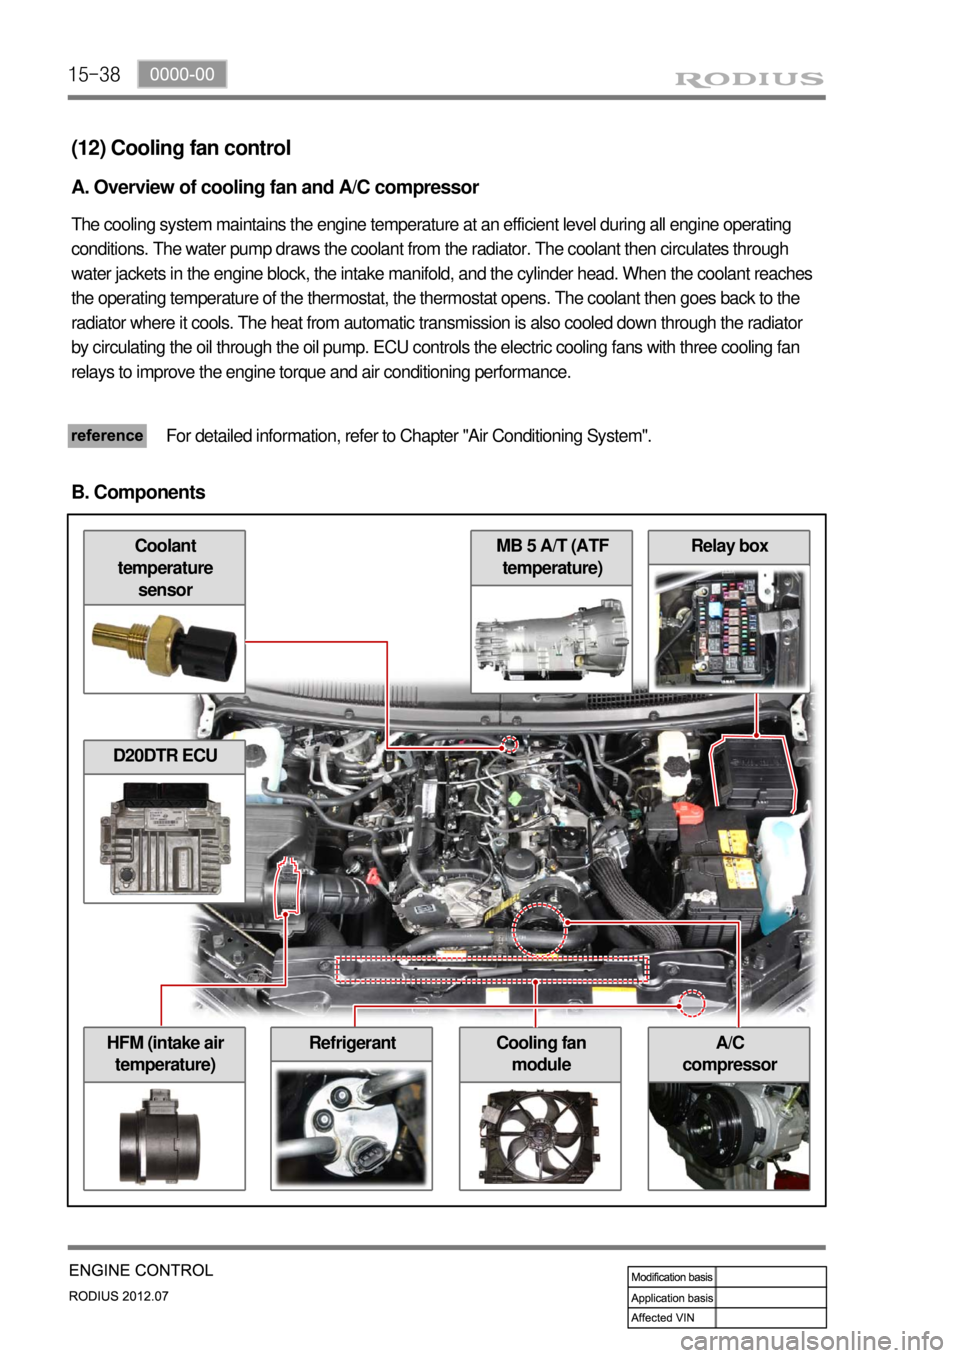 SSANGYONG RODIUS 2012  Service Manual 15-38
Relay box
A/C 
compressorHFM (intake air 
temperature)Cooling fan 
module
MB 5 A/T (ATF 
temperature)Coolant 
temperature 
sensor
(12) Cooling fan control
A. Overview of cooling fan and A/C comp